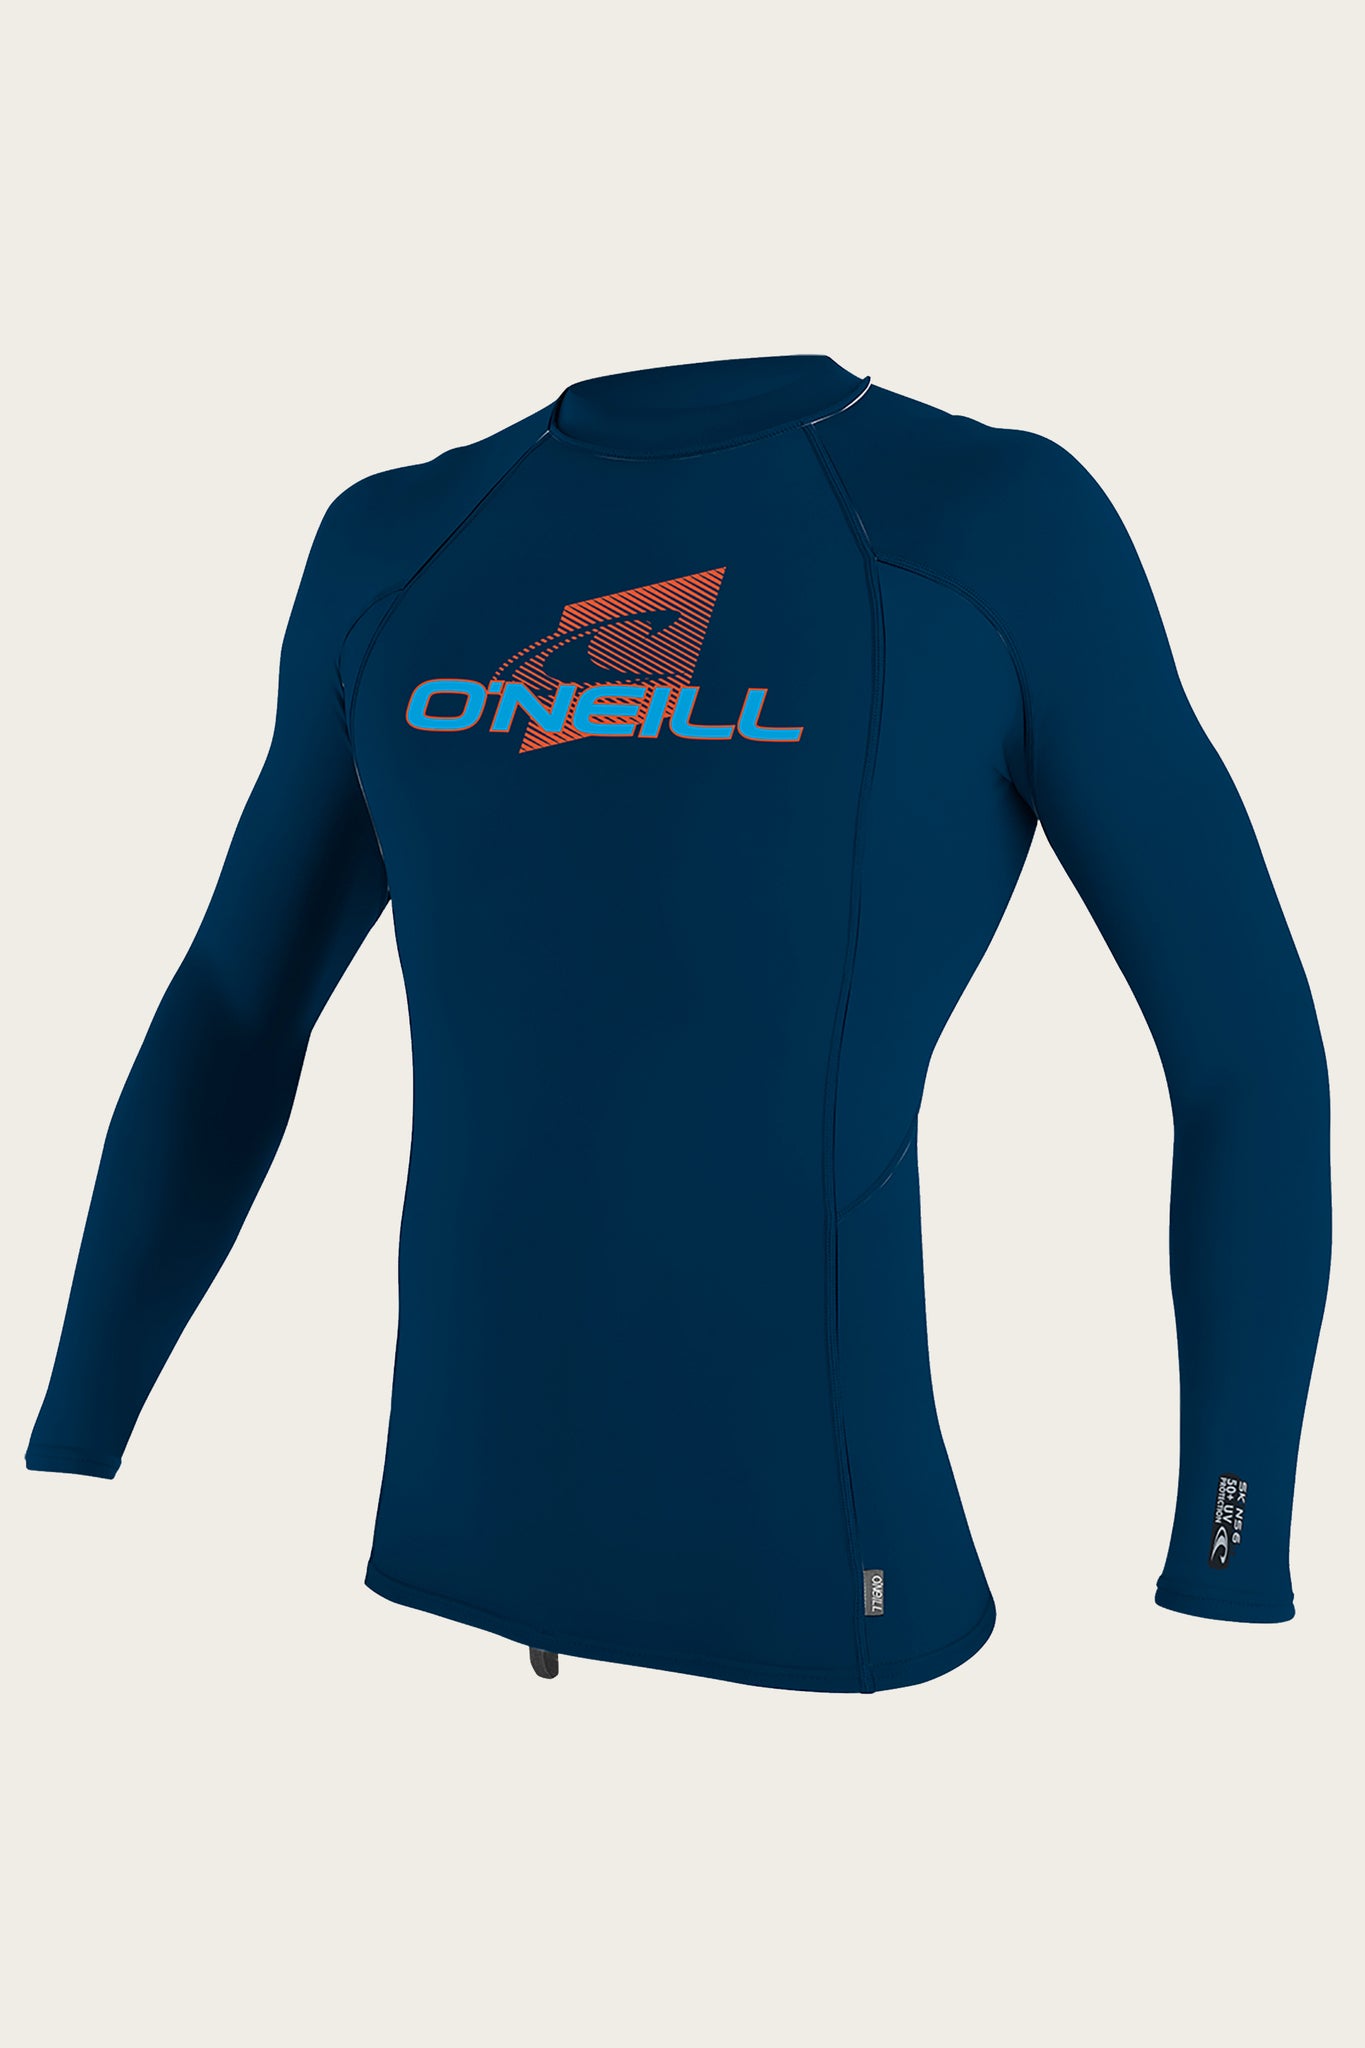 Youth Premium Skins L/S Rash Guard - Abyss/Abyss/Abyss | O'Neill